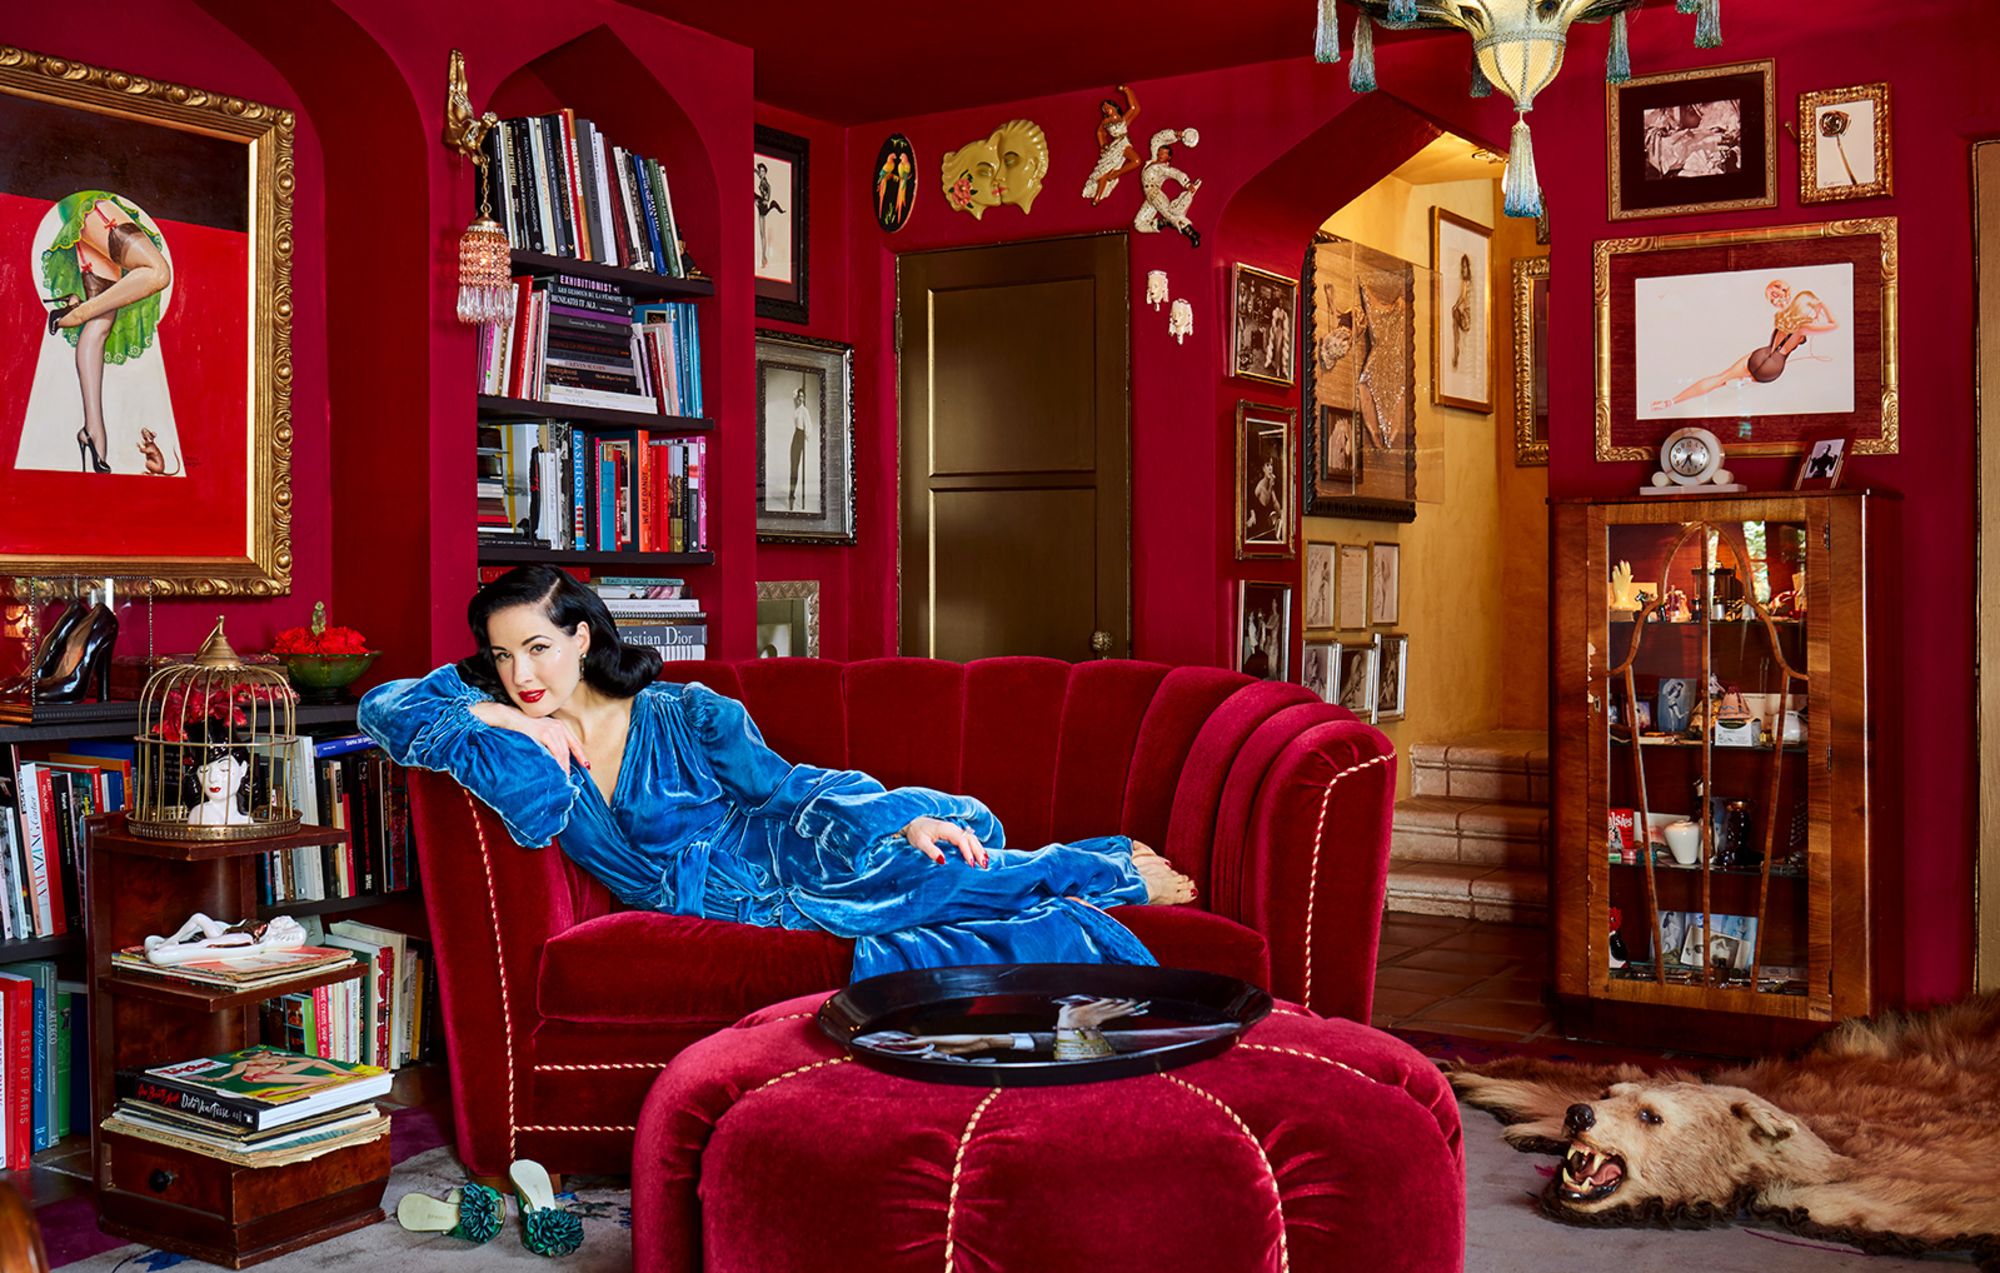 The red room is Von Teese's library. Built-in shelves, designed to mirror the room's preexisting Moorish archways, were added in order to house the star's extensive book collection. (She's a bestselling author herself; Von Teese's latest book, a style guide entitled Fashioning the Femme Fatale, is due next year.) The room showcases a lot of Von Teese's extensive antiques collection—"things were just made more beautifully back then"—but the couch is a reproduction. "I didn't have room for a full-size Art Deco couch, so we created something with a '30s look, but on a smaller scale," she says. Von Teese wears one of her favorite pieces of vintage loungewear, which she happens to collect. "This one's really extravagant," she says. "It has a long train and these long balloon sleeves, and you just can't help but wonder why. Maybe it was made for a movie or something."(Architectural Digest)